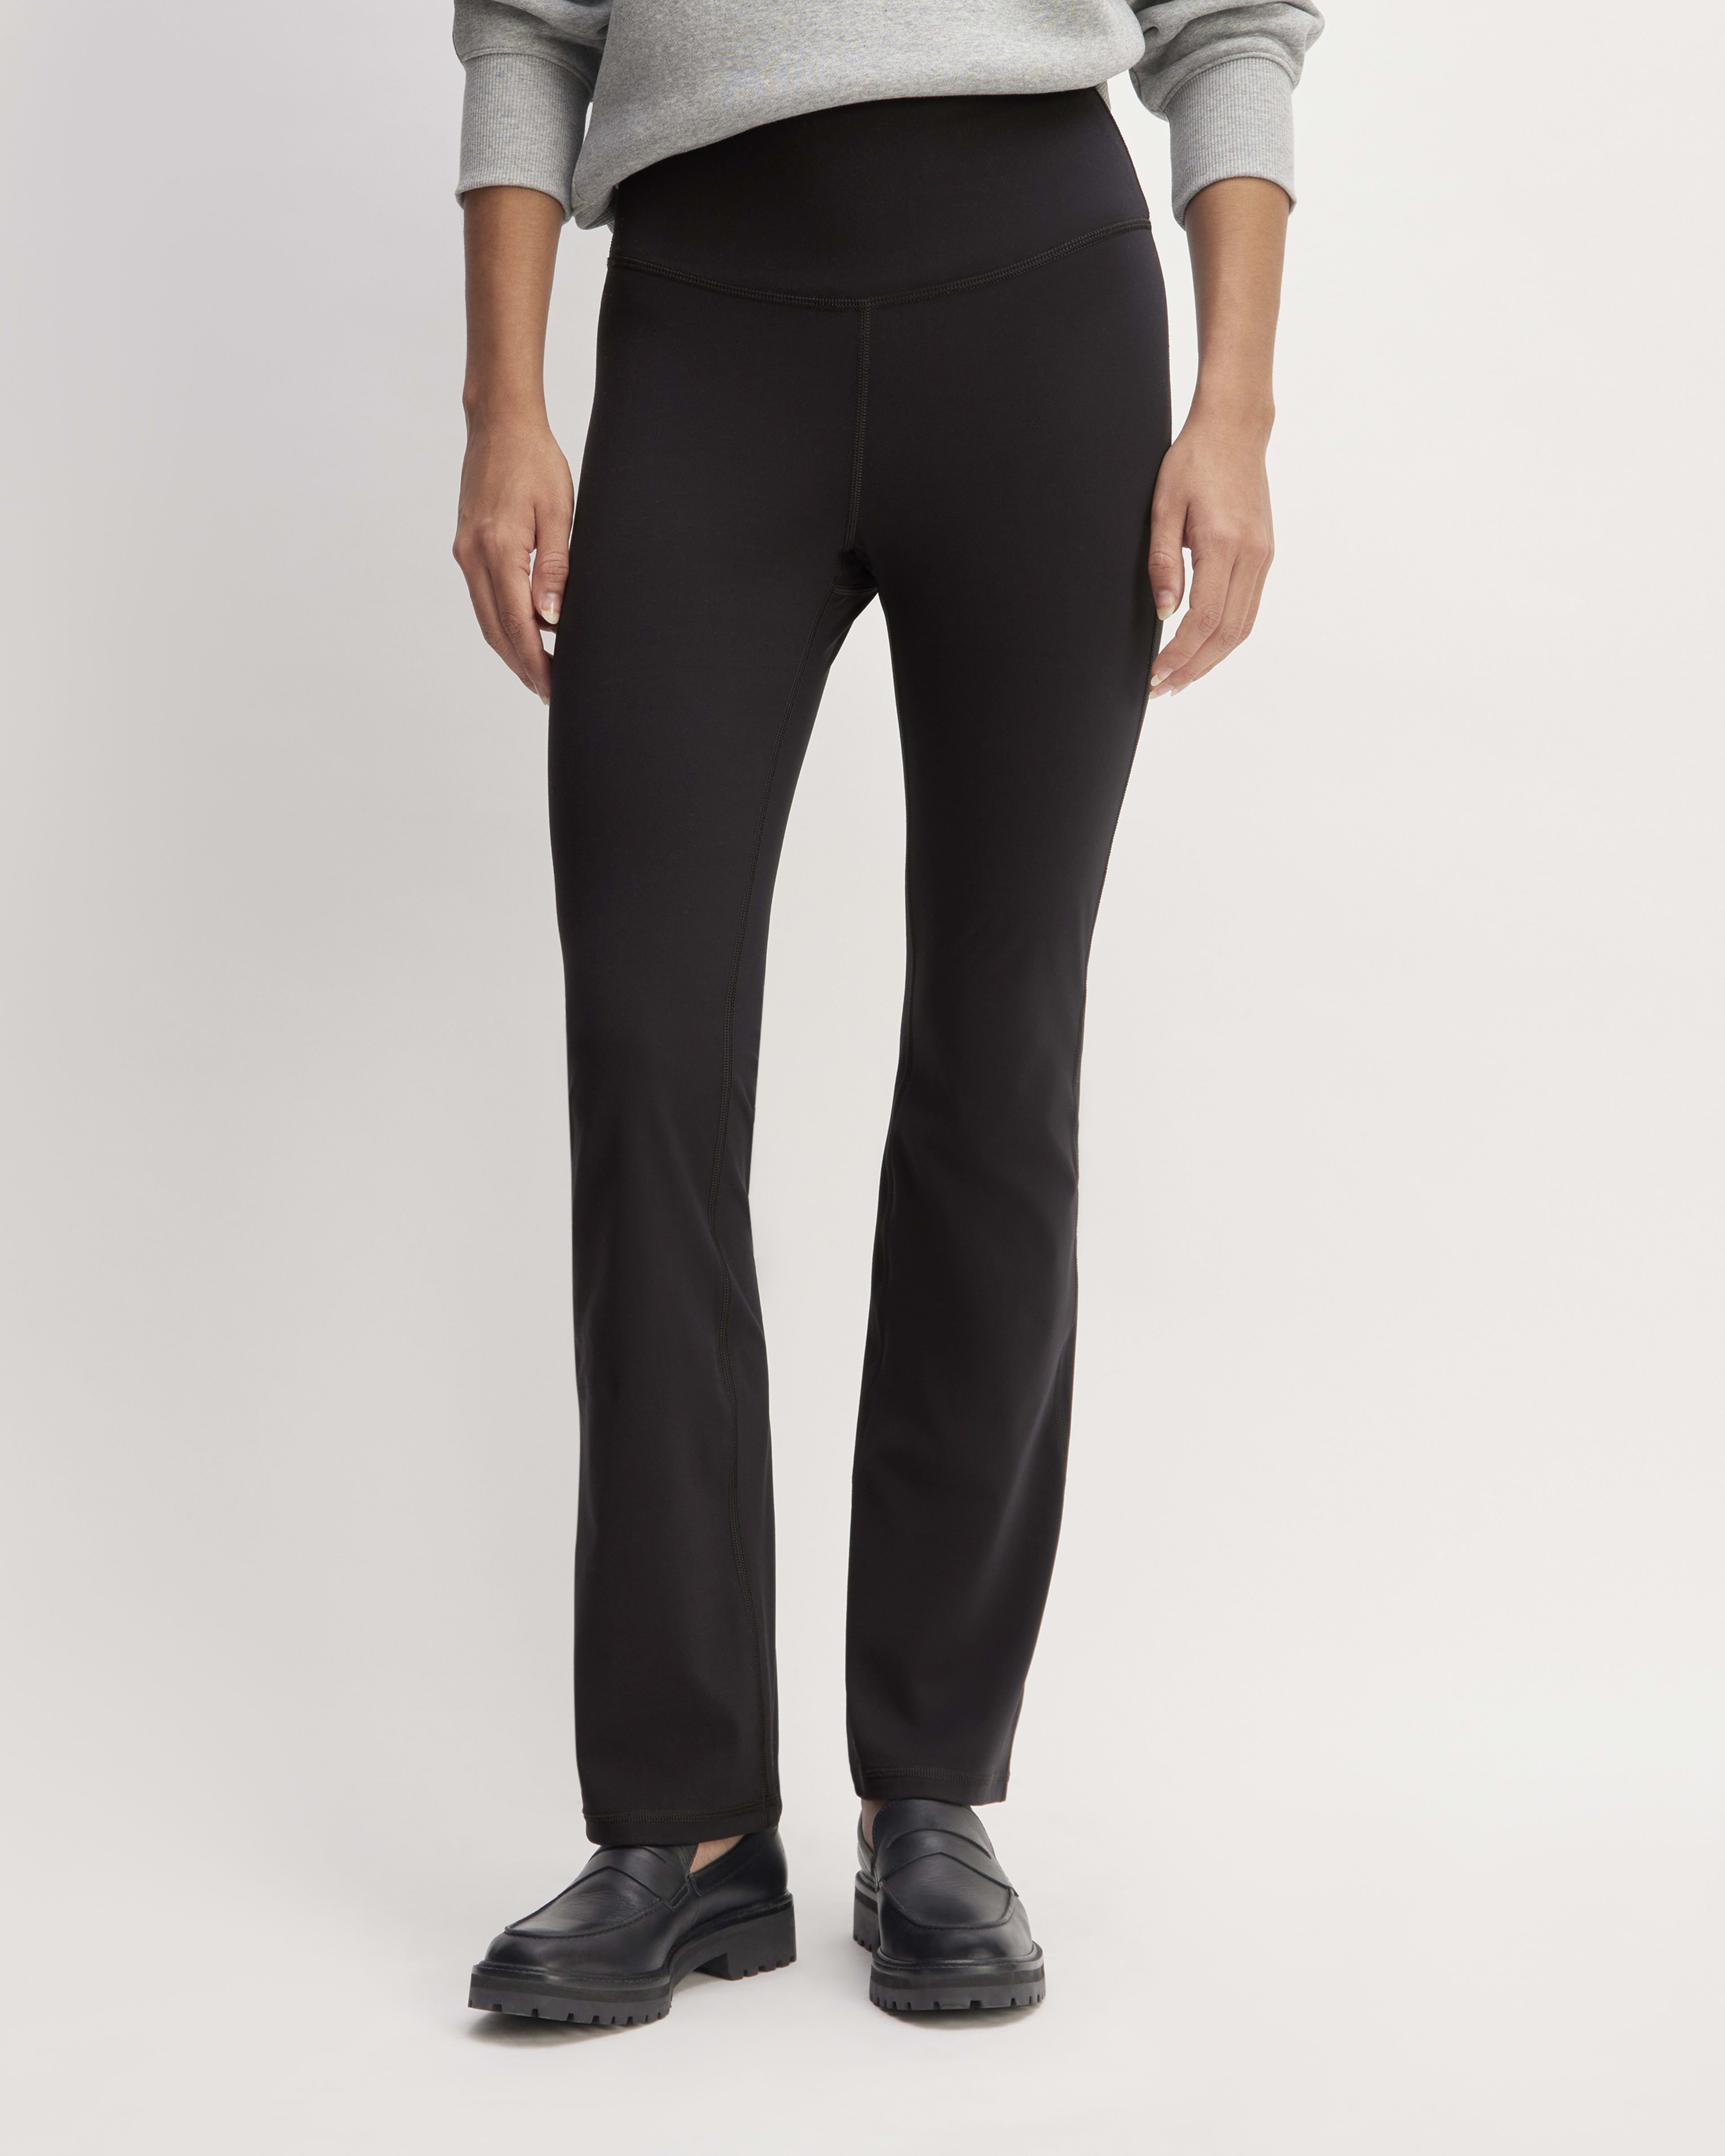 Women's Athleisure, Active & Loungewear  Clothing & Accessories - New  Arrivals – Everlane